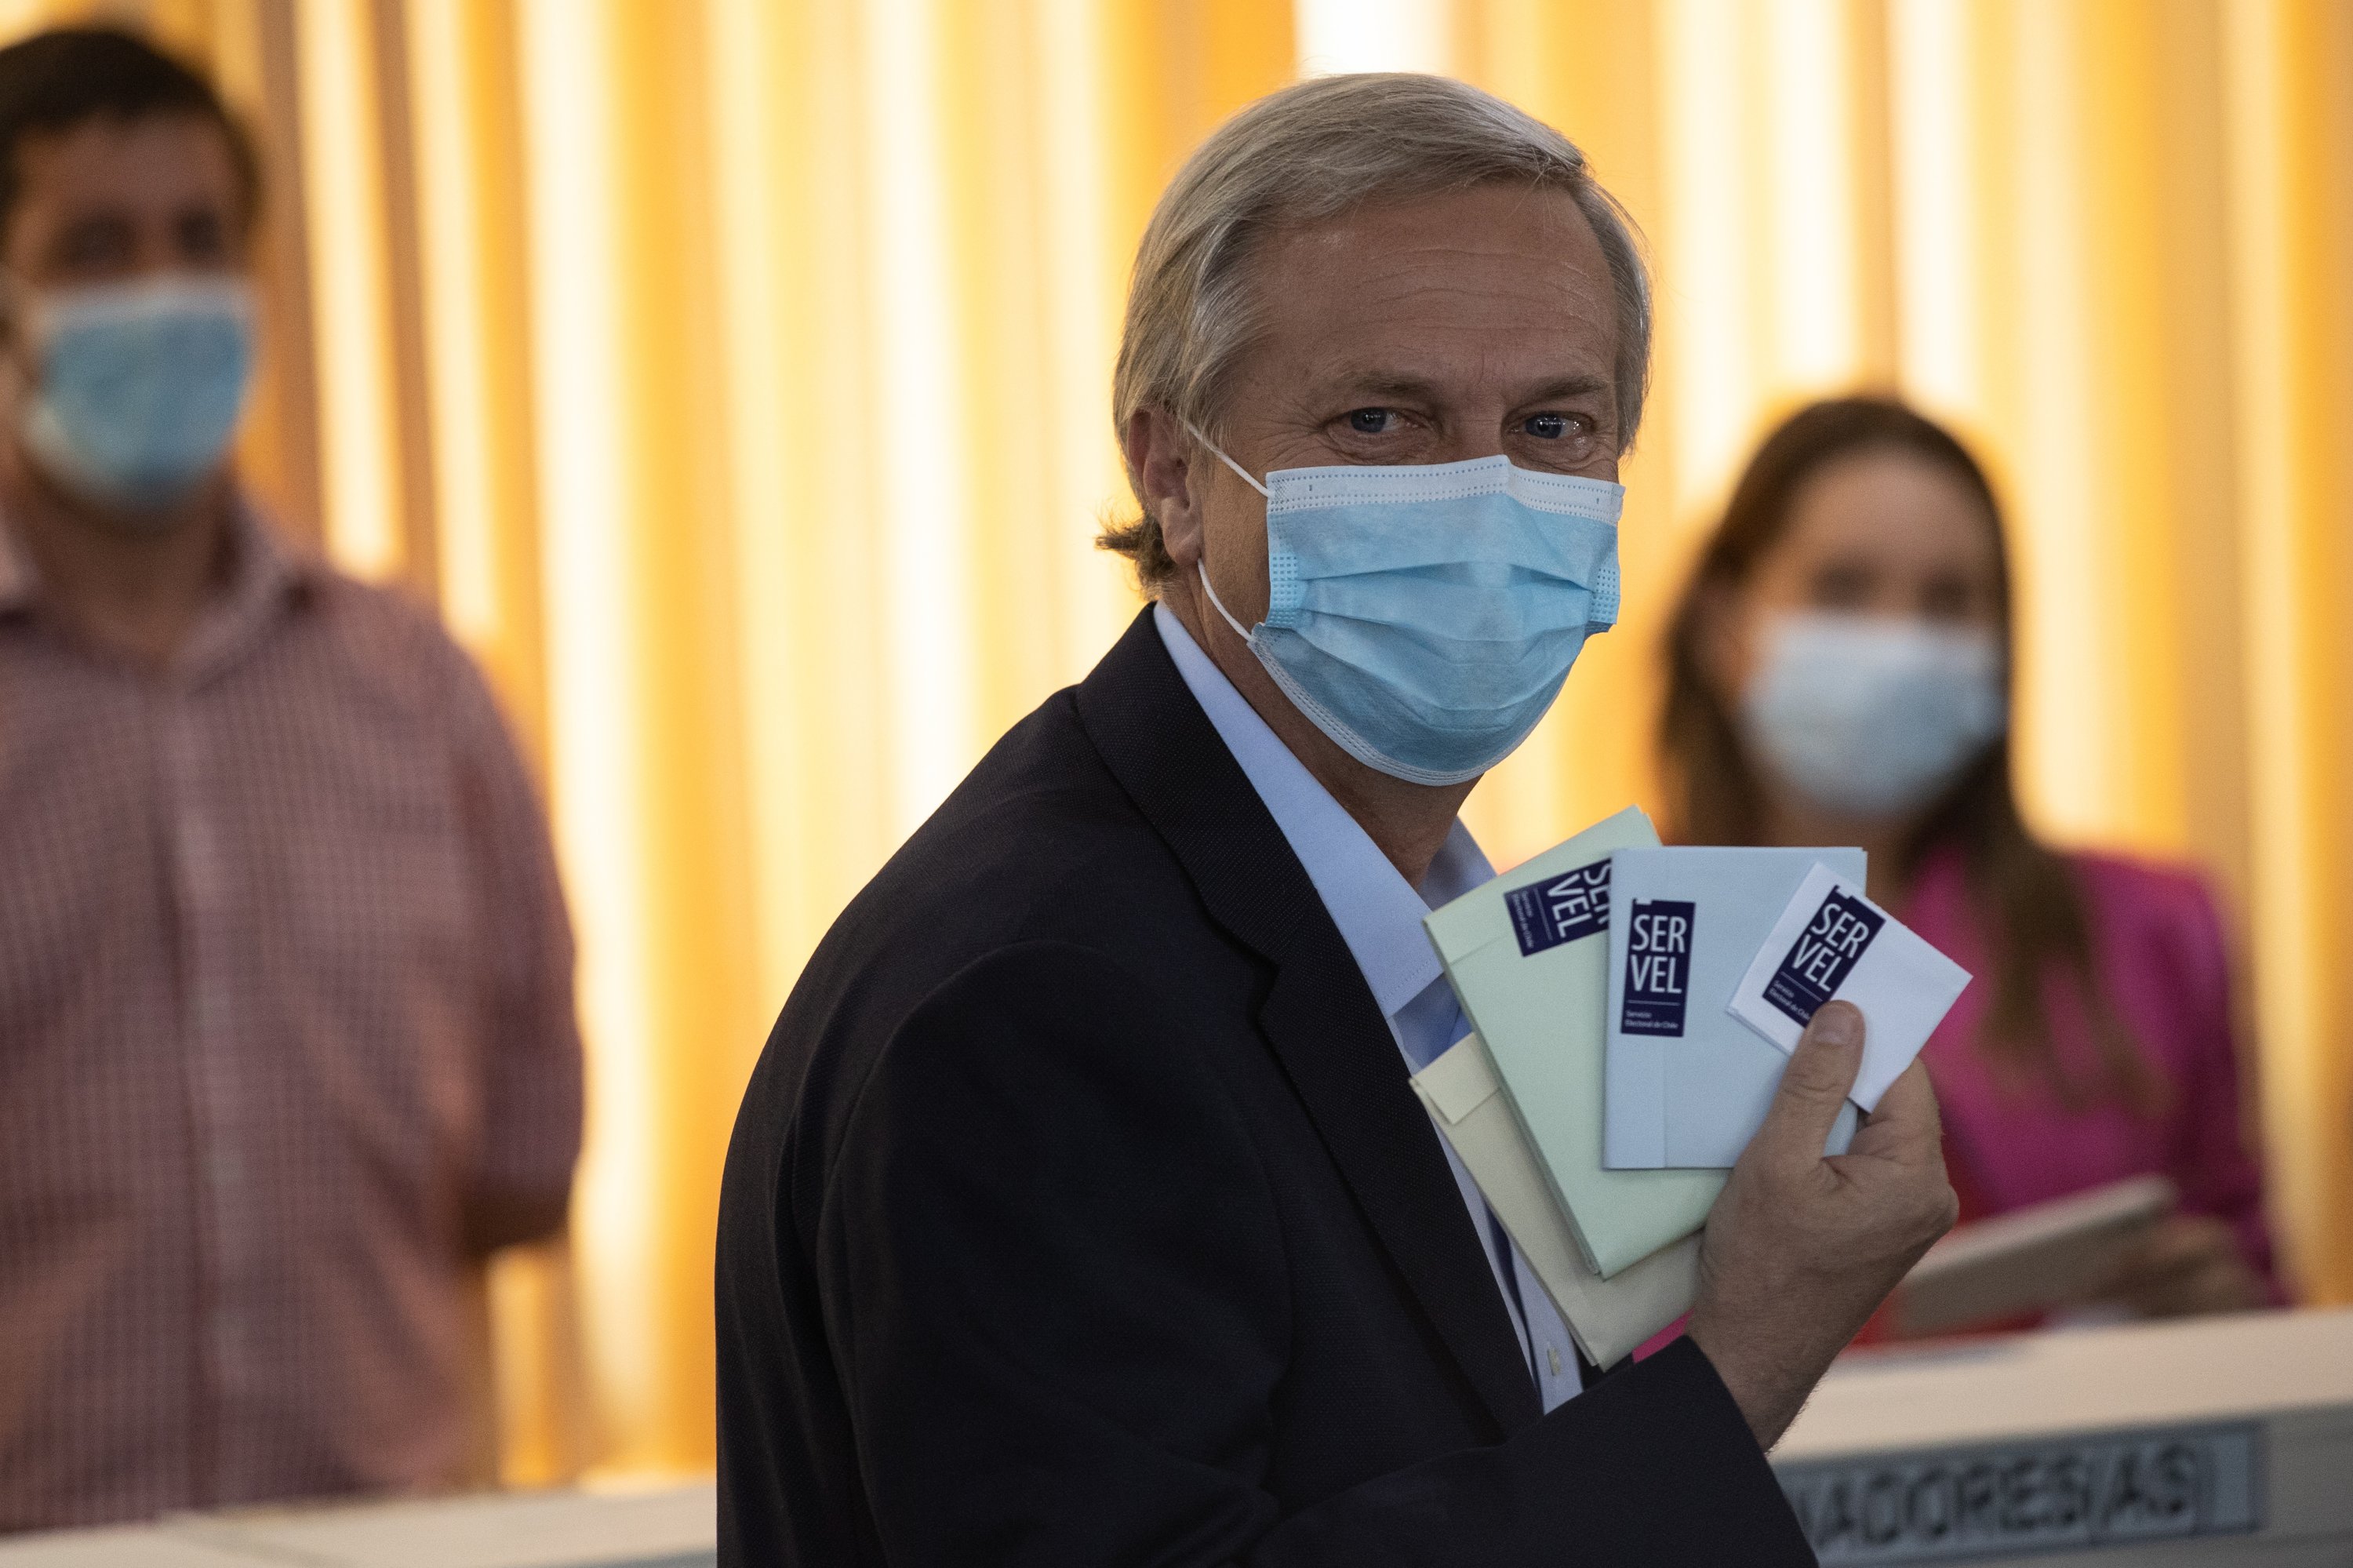 Chile presidential candidate of the Partido Republicano Jose Antonio Kast votes in a polling station at the Ana Mogas de Paine high school facilities in Santiago, Chile, Nov. 21, 2021. (EPA Photo)